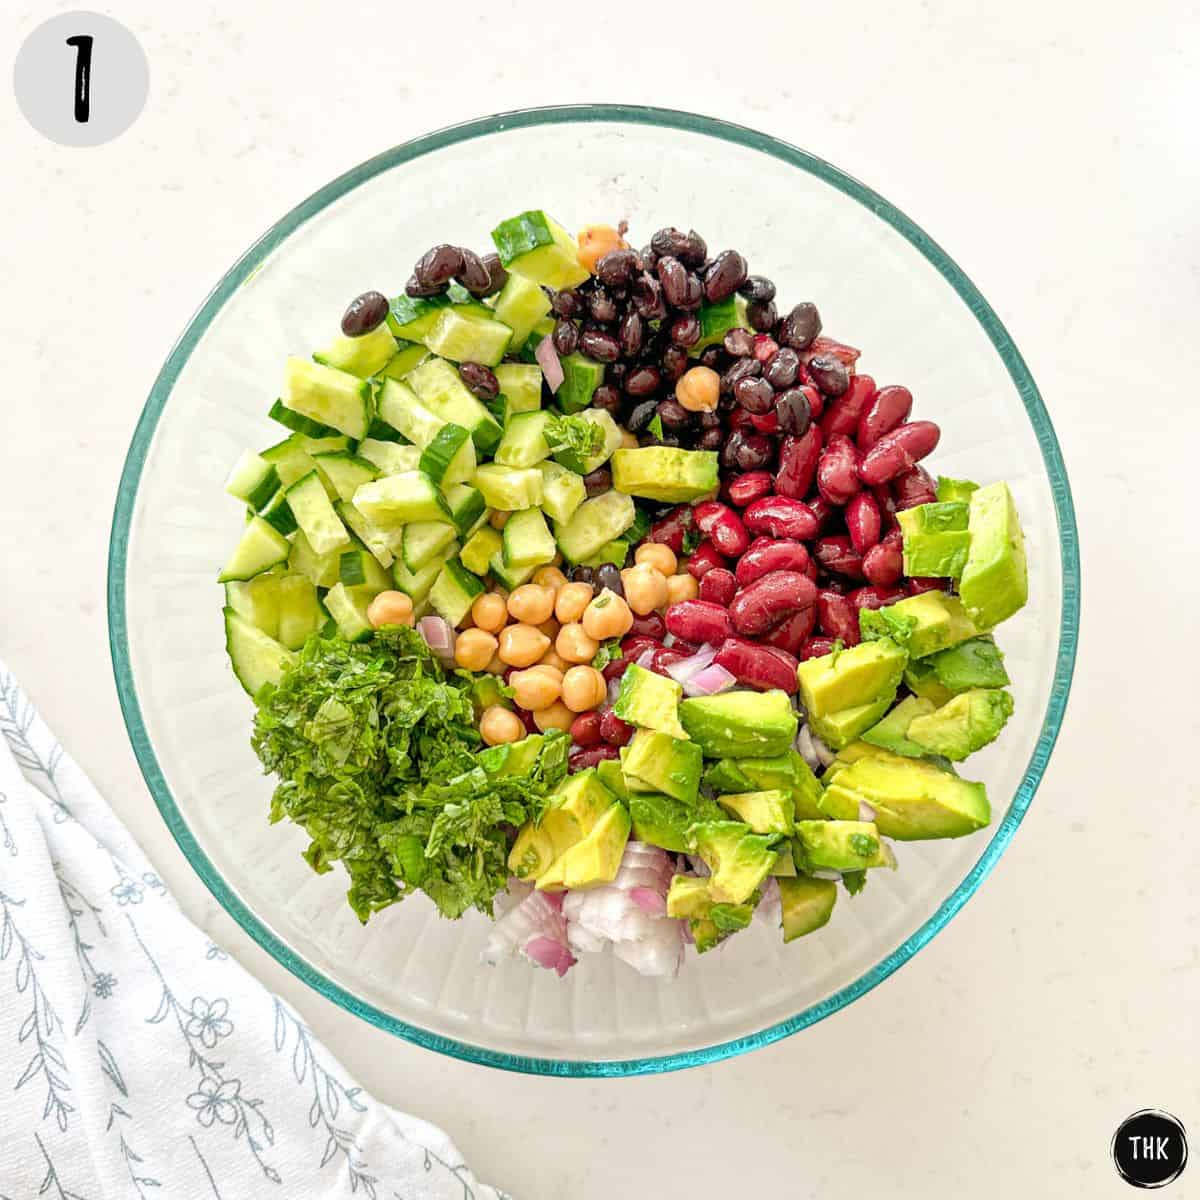 Mixing bowl with black beans, chickpeas, kidney beans, cucumber, avocado, onion, and basil.